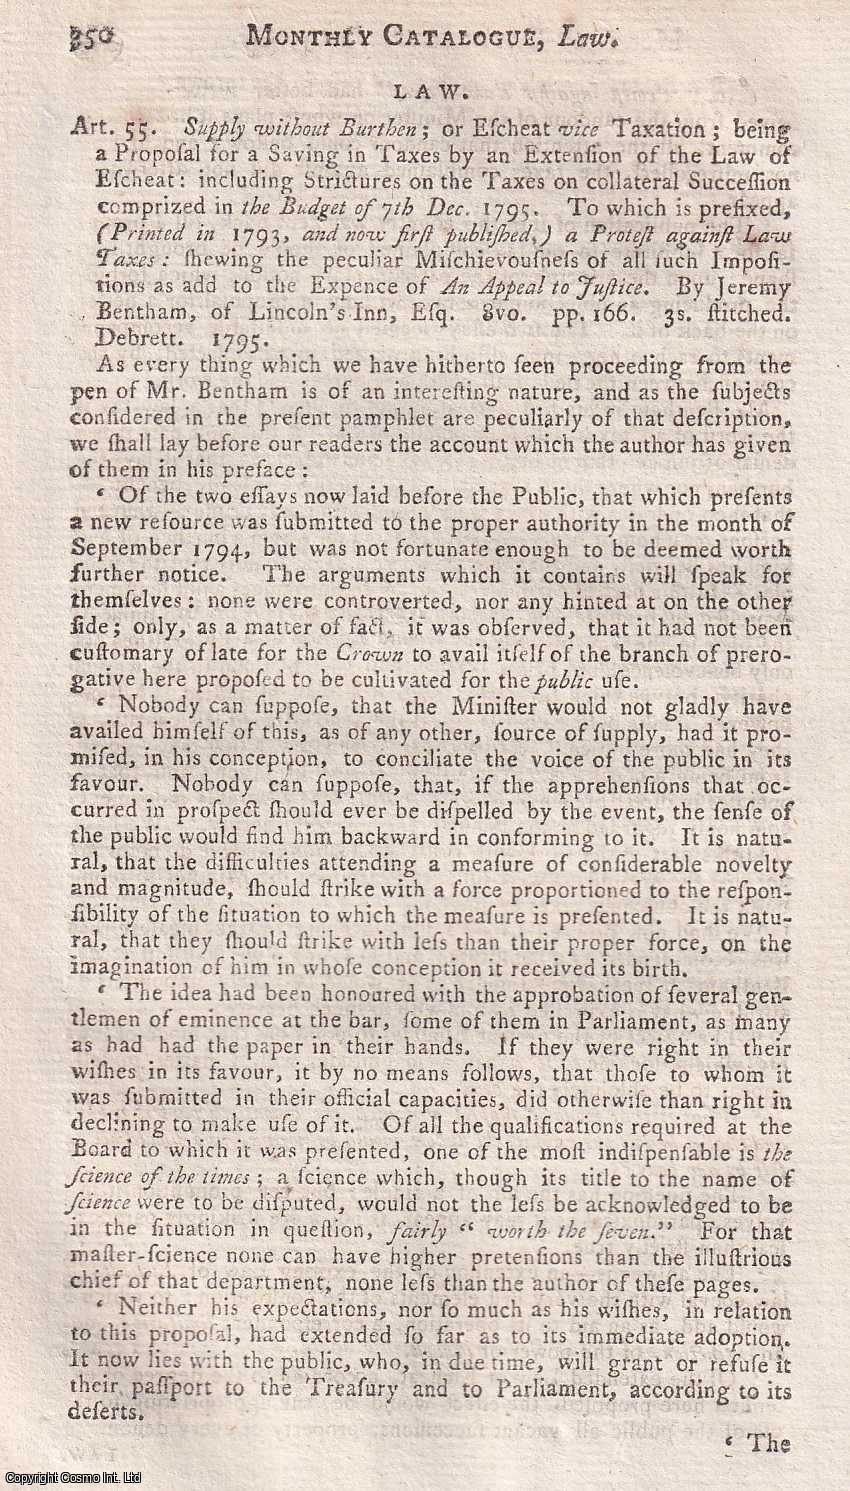 Author Not Stated - Supply without Burthen; or Escheat vice Taxation, by Jeremy Bentham. An original essay from the Monthly Review, 1796. No author is given for this article.